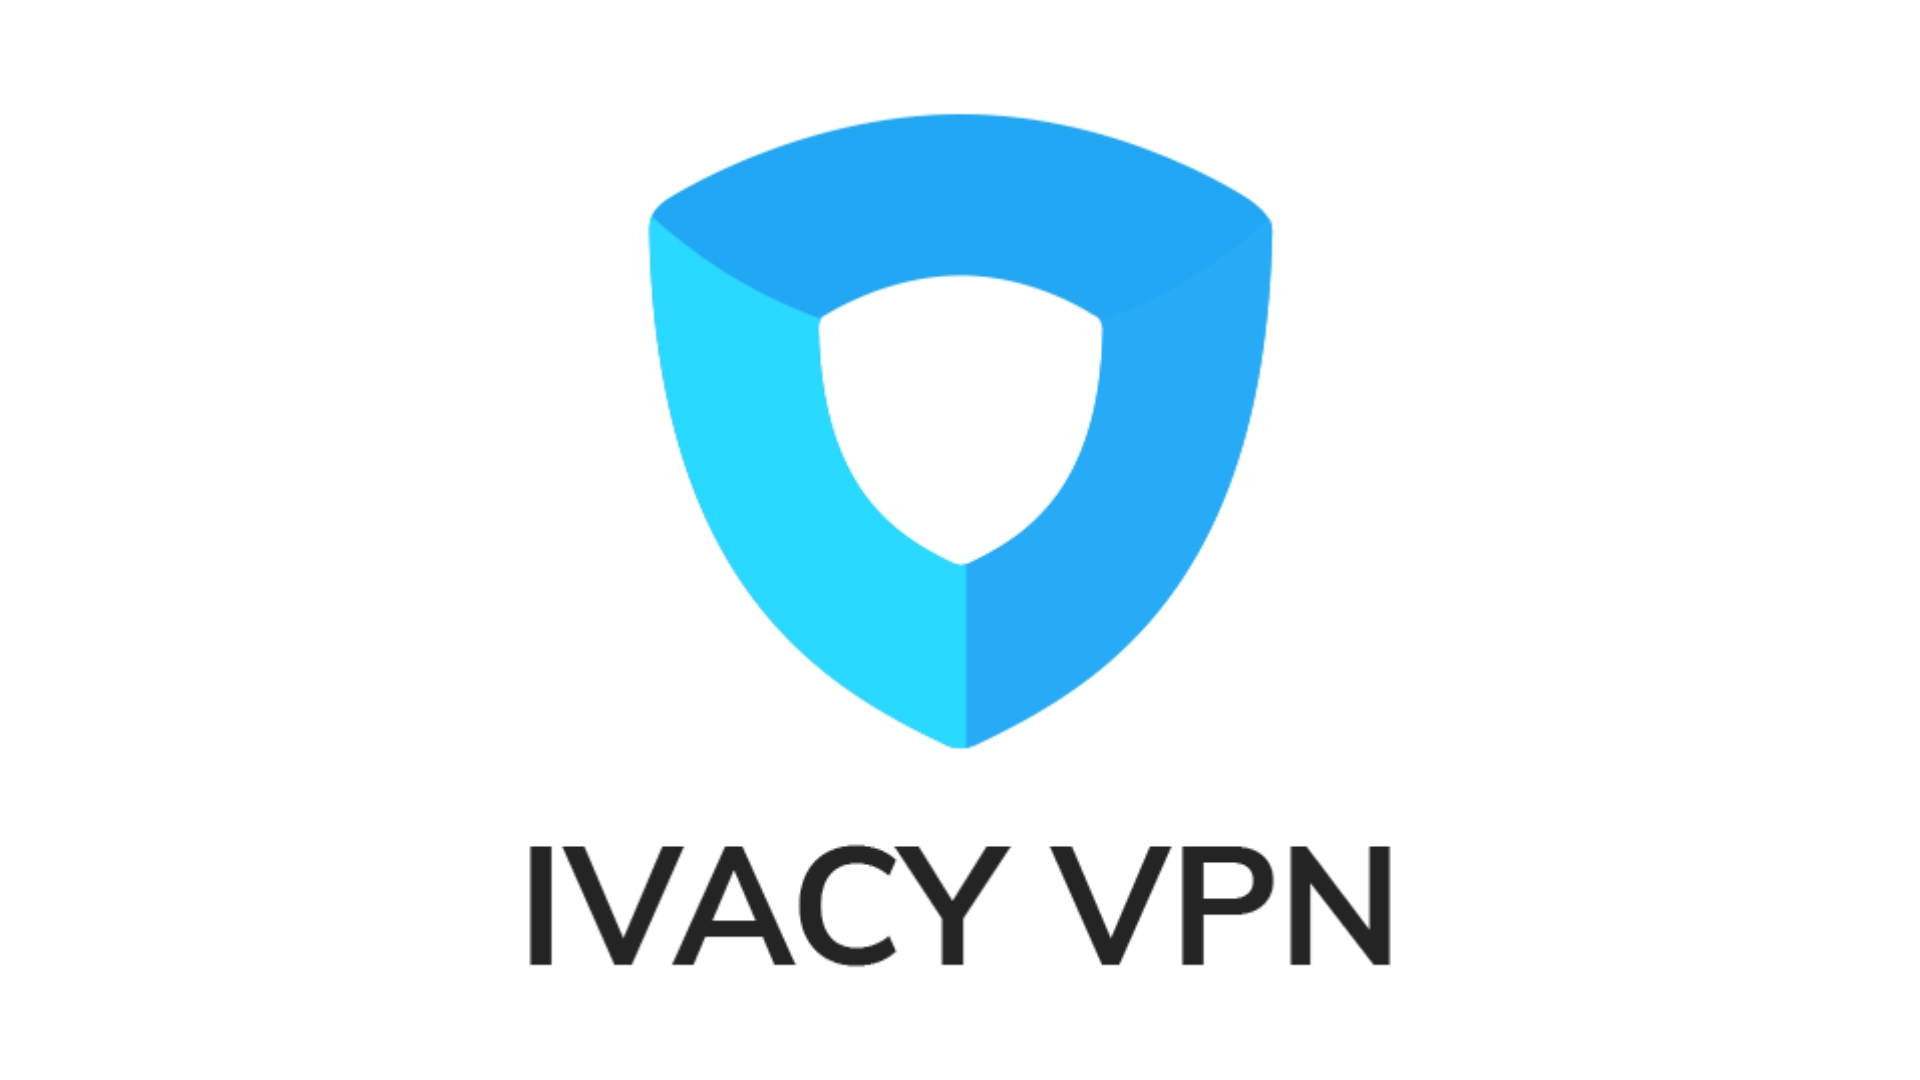 Best Firefox VPN: Ivacy VPN.  The image shows the company logo.